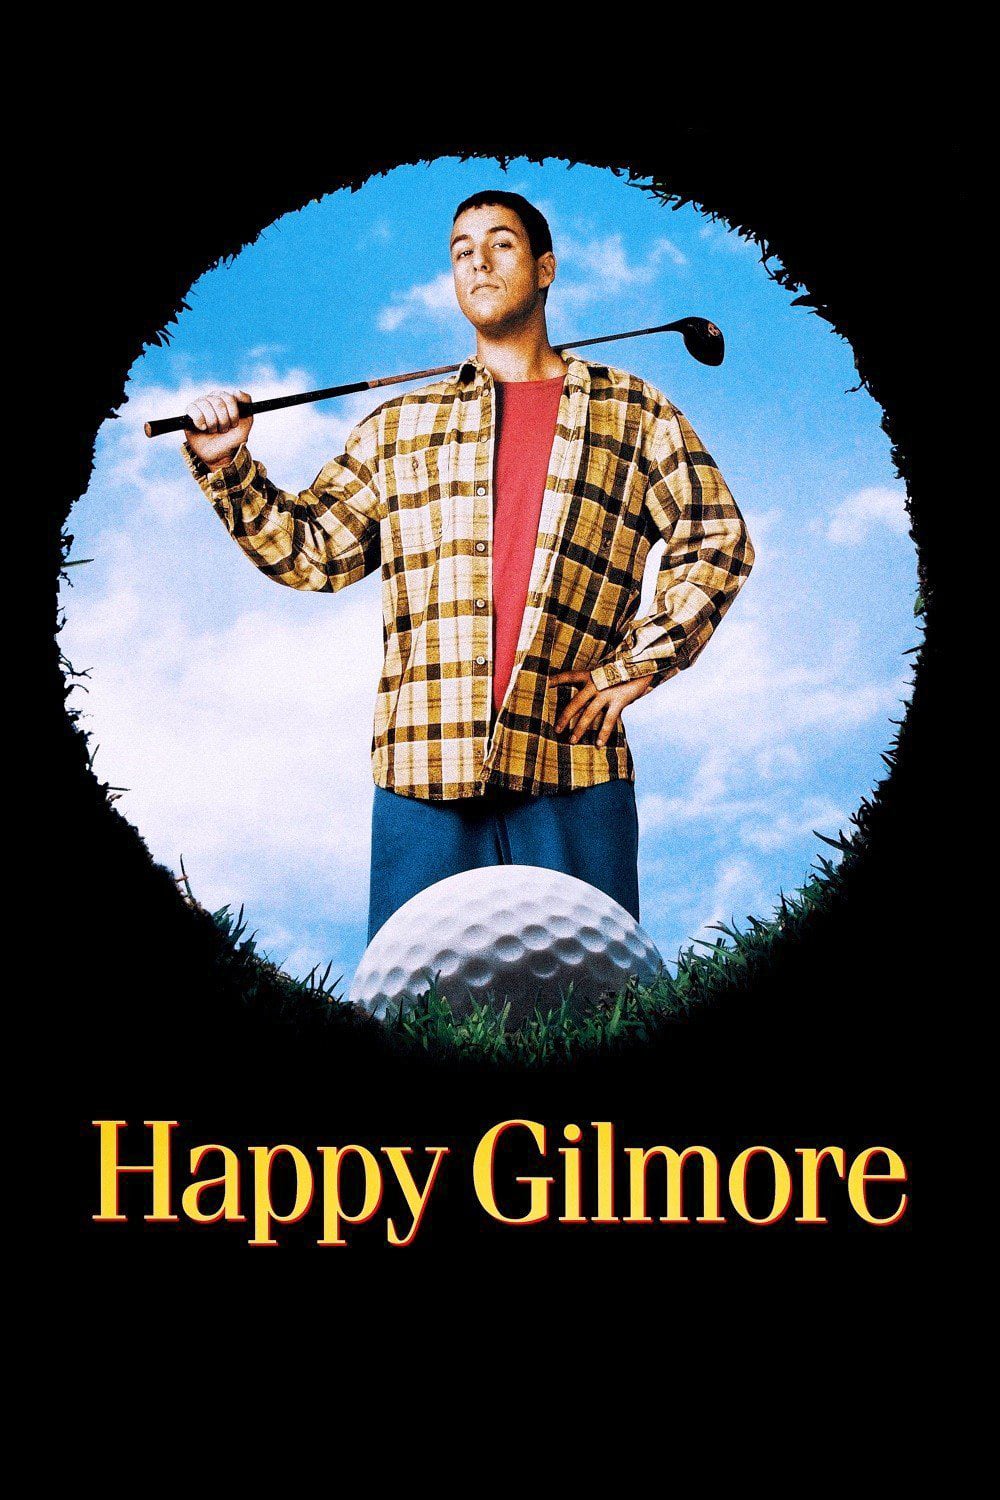 Poster for the movie "Happy Gilmore"